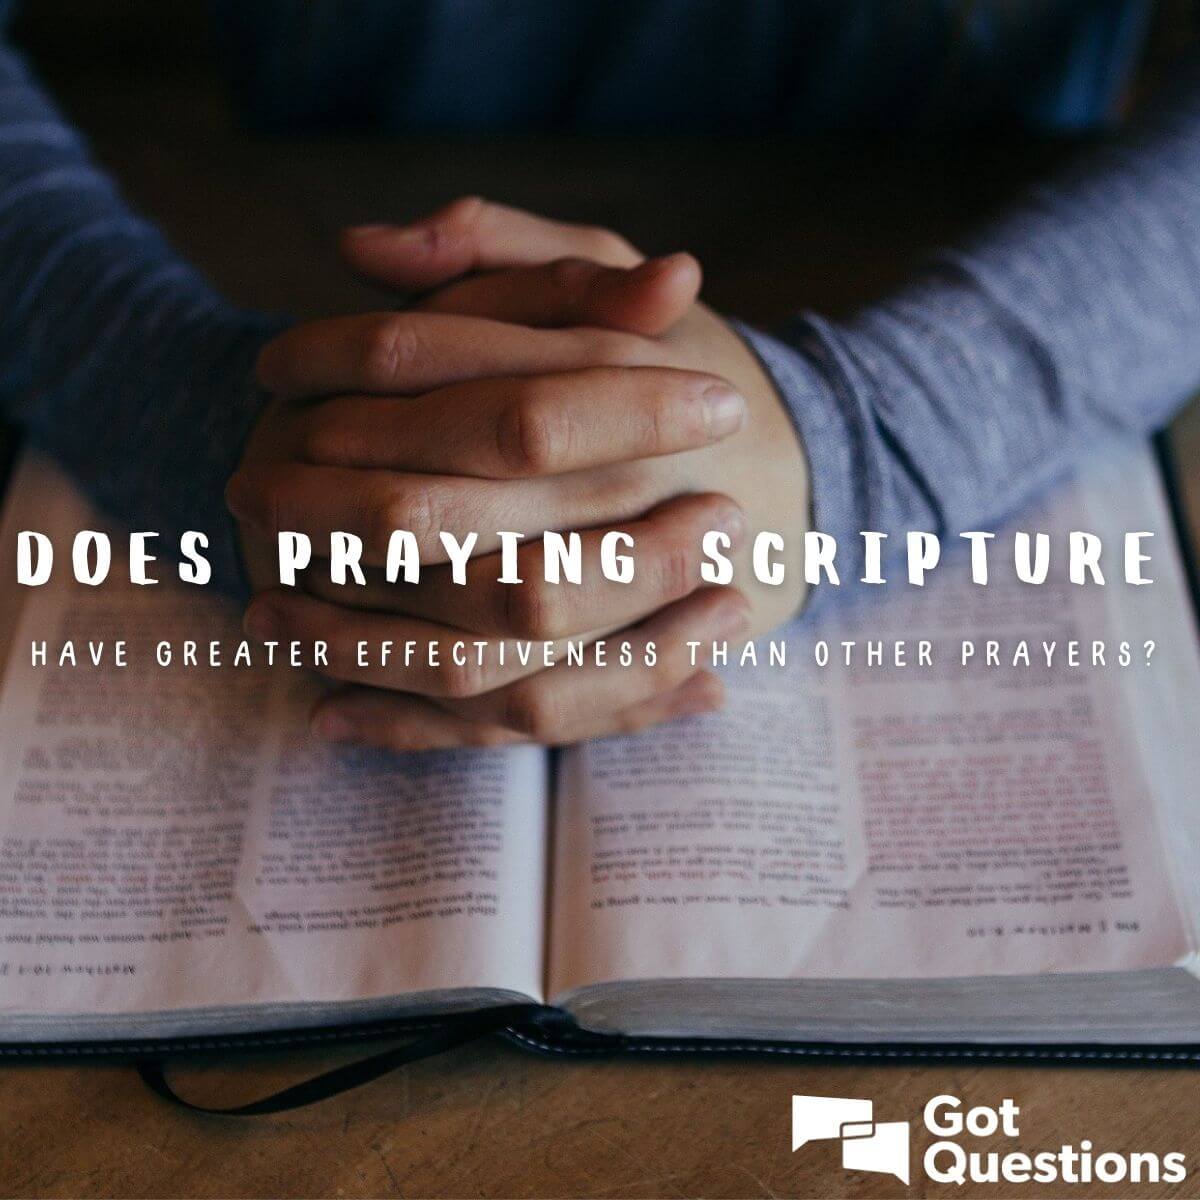 Does praying Scripture have greater effectiveness than other prayers